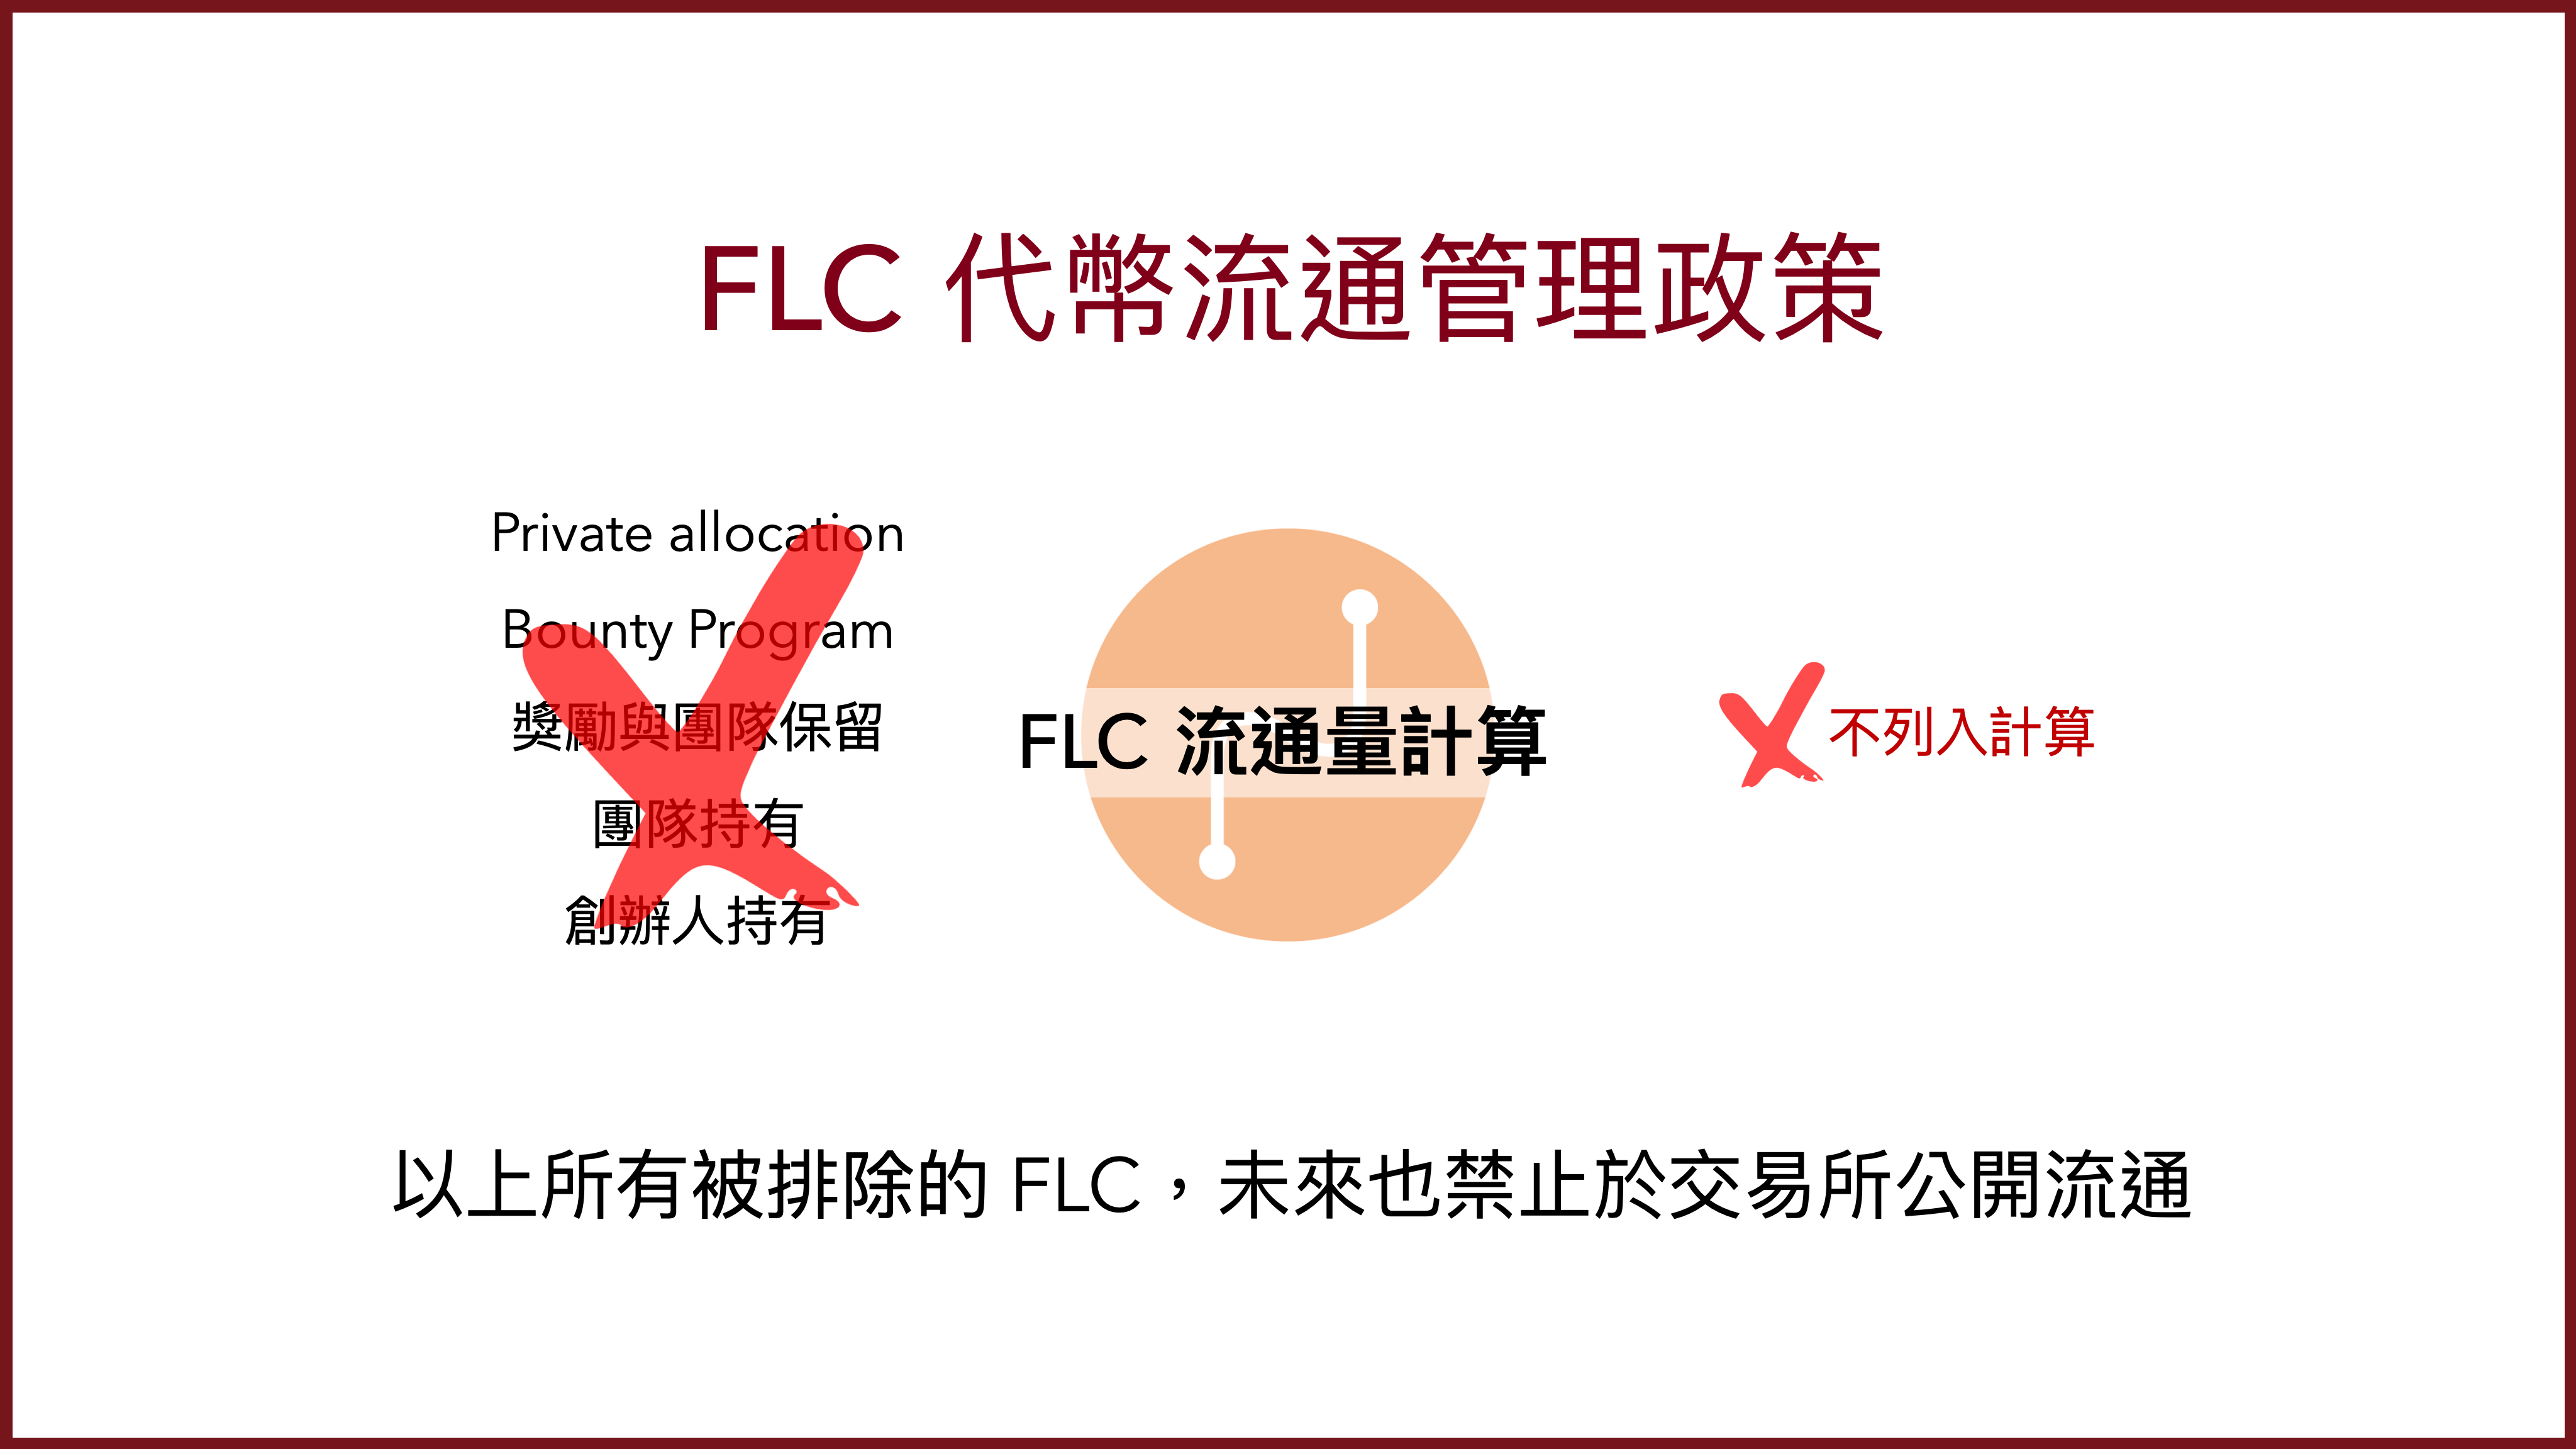 FLC policy